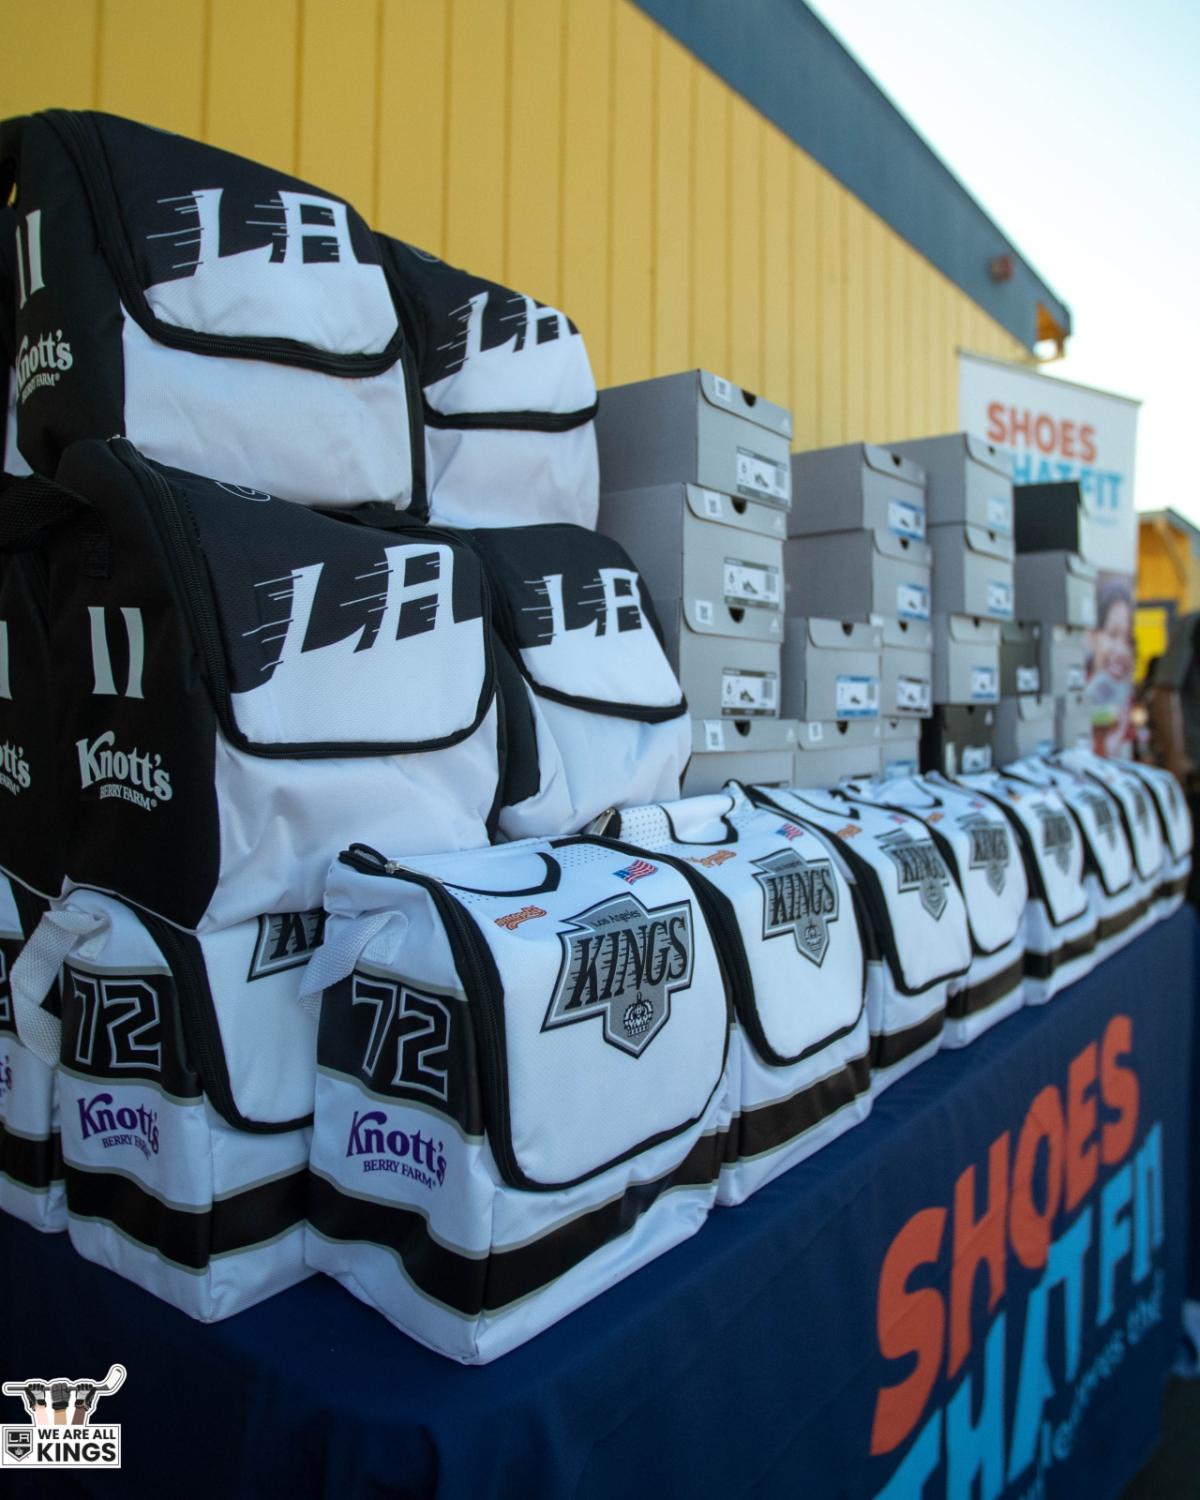 LA Kings lunchboxes and adidas sneakers are stacked prior to distribution to students at Longfellow Elementary School in Compton, Calif. 